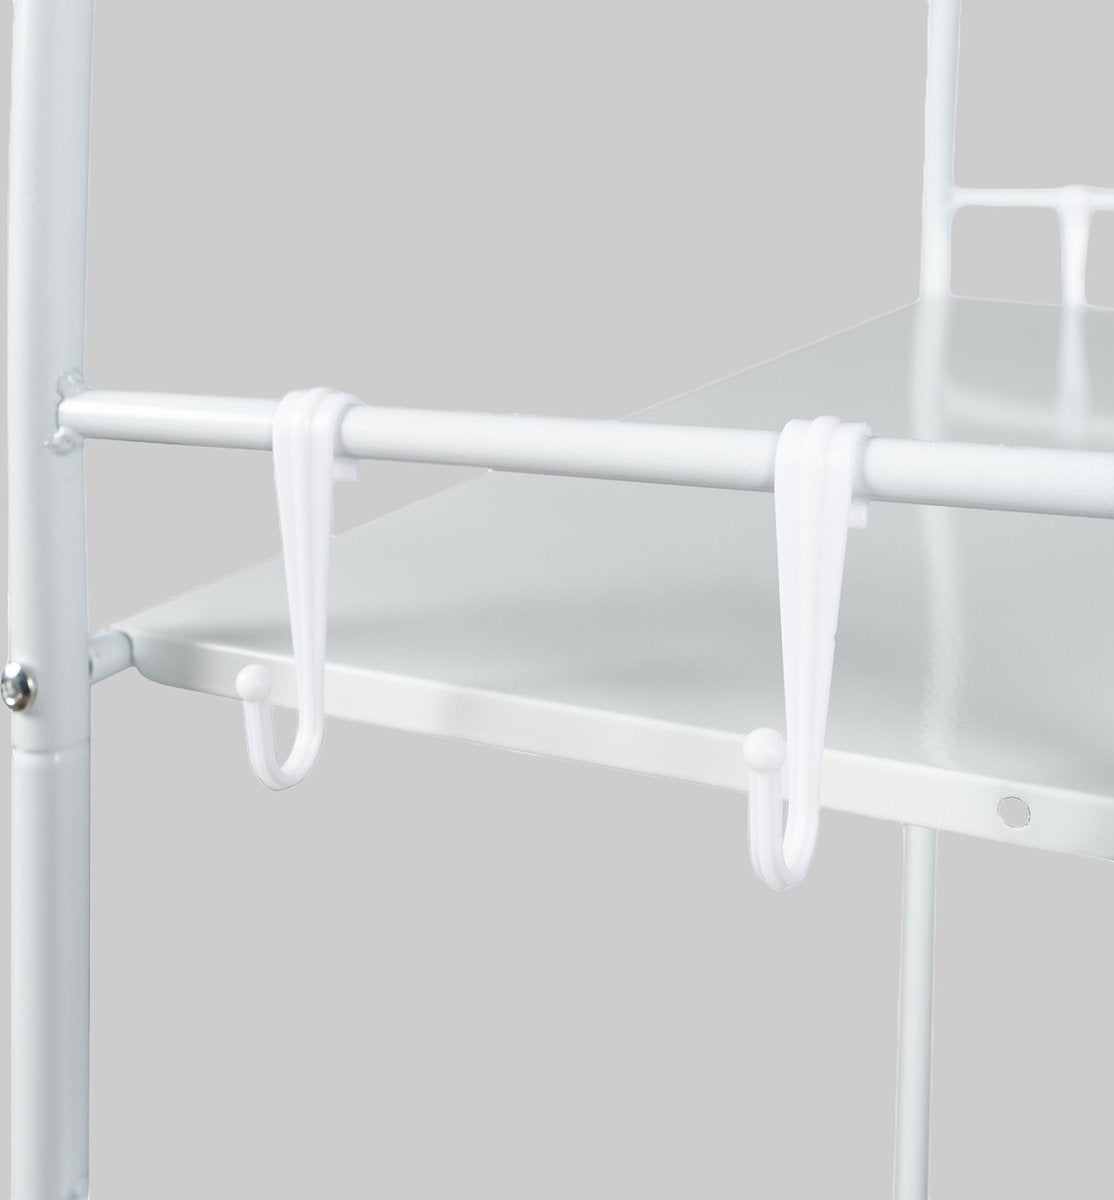 LG Life's Green washing machine conversion Storage rack with 3 shelves and towel hooks White